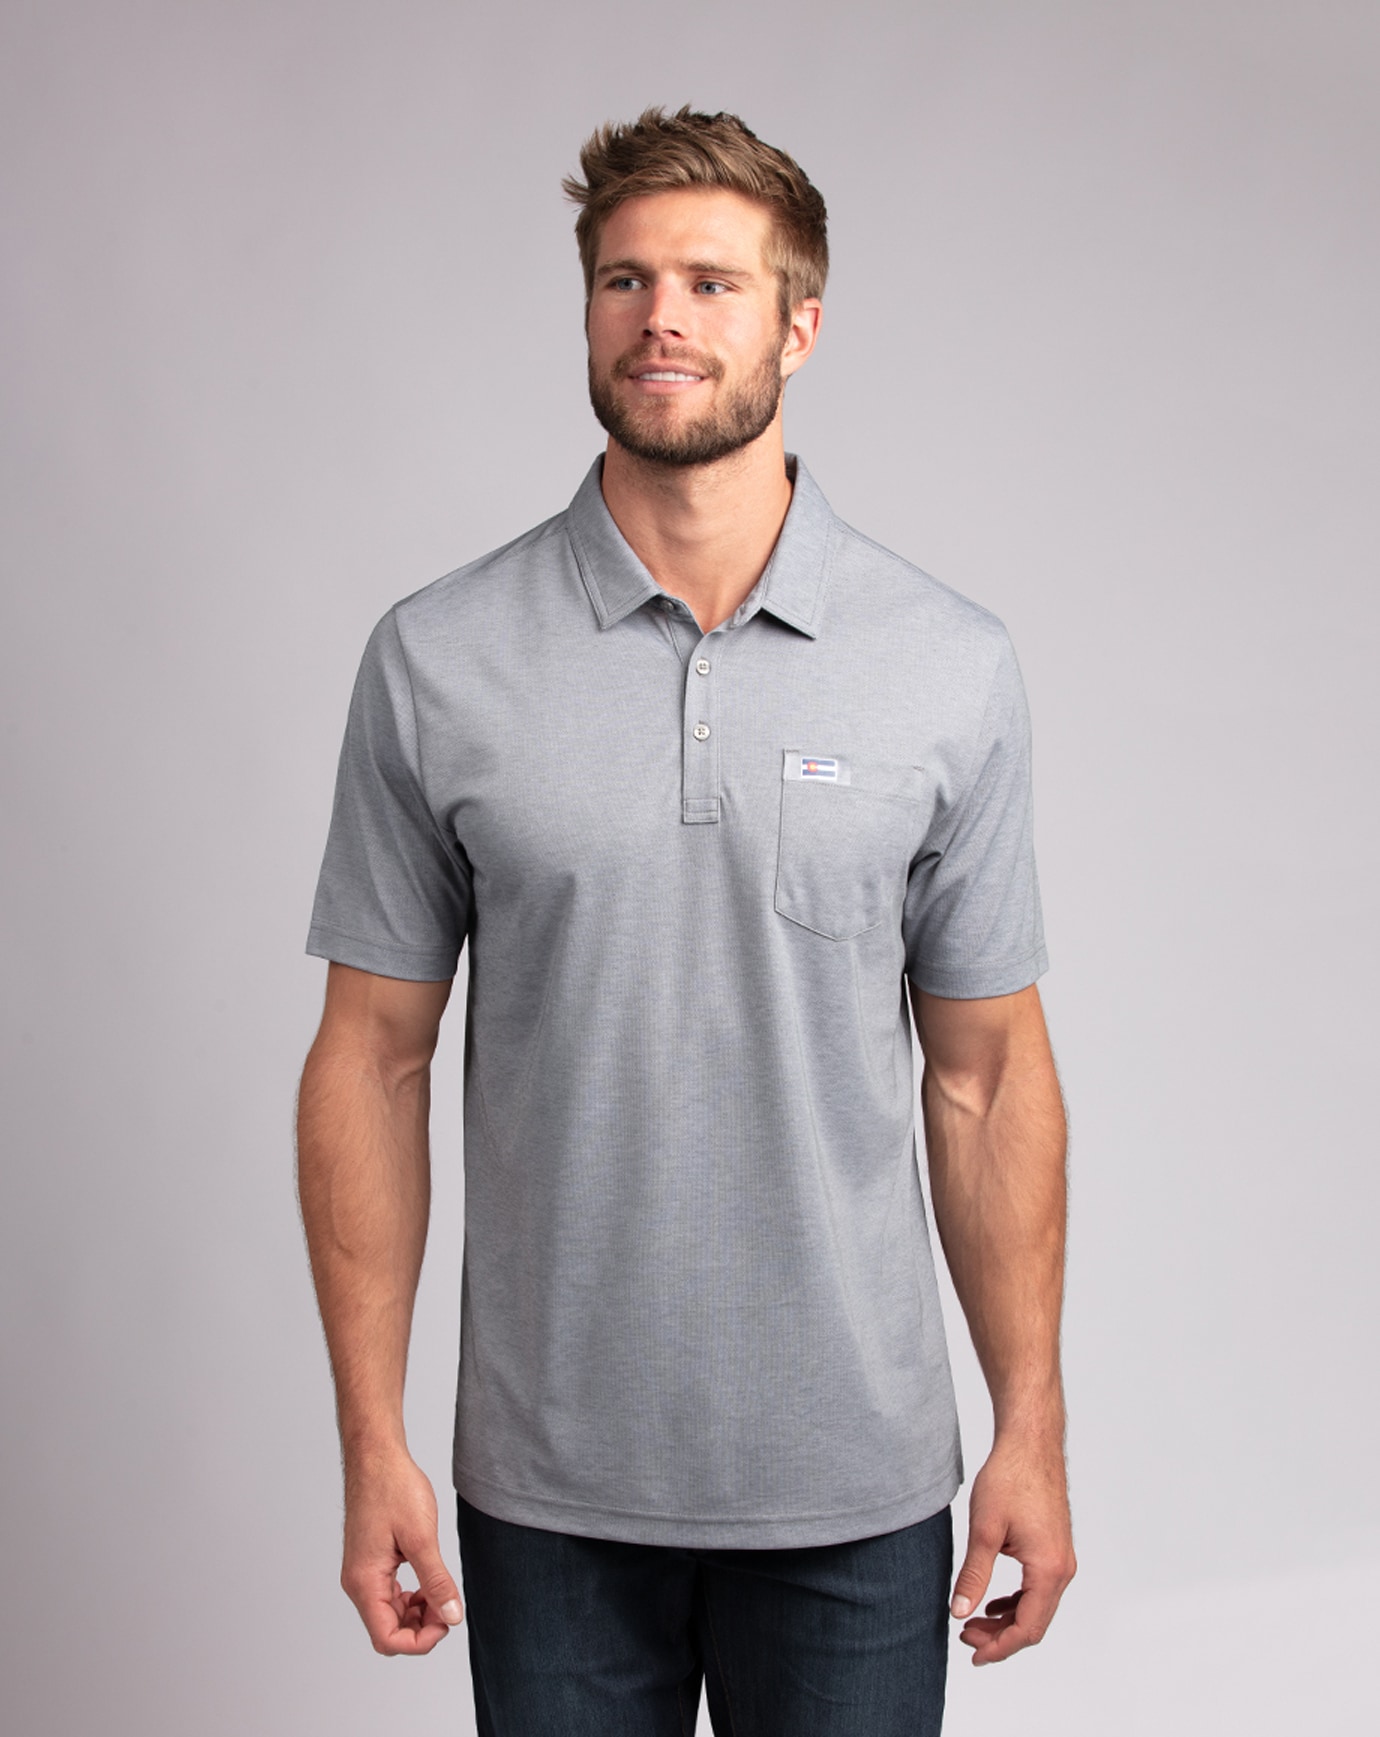 Related Product - BUNNY SLOPE POLO